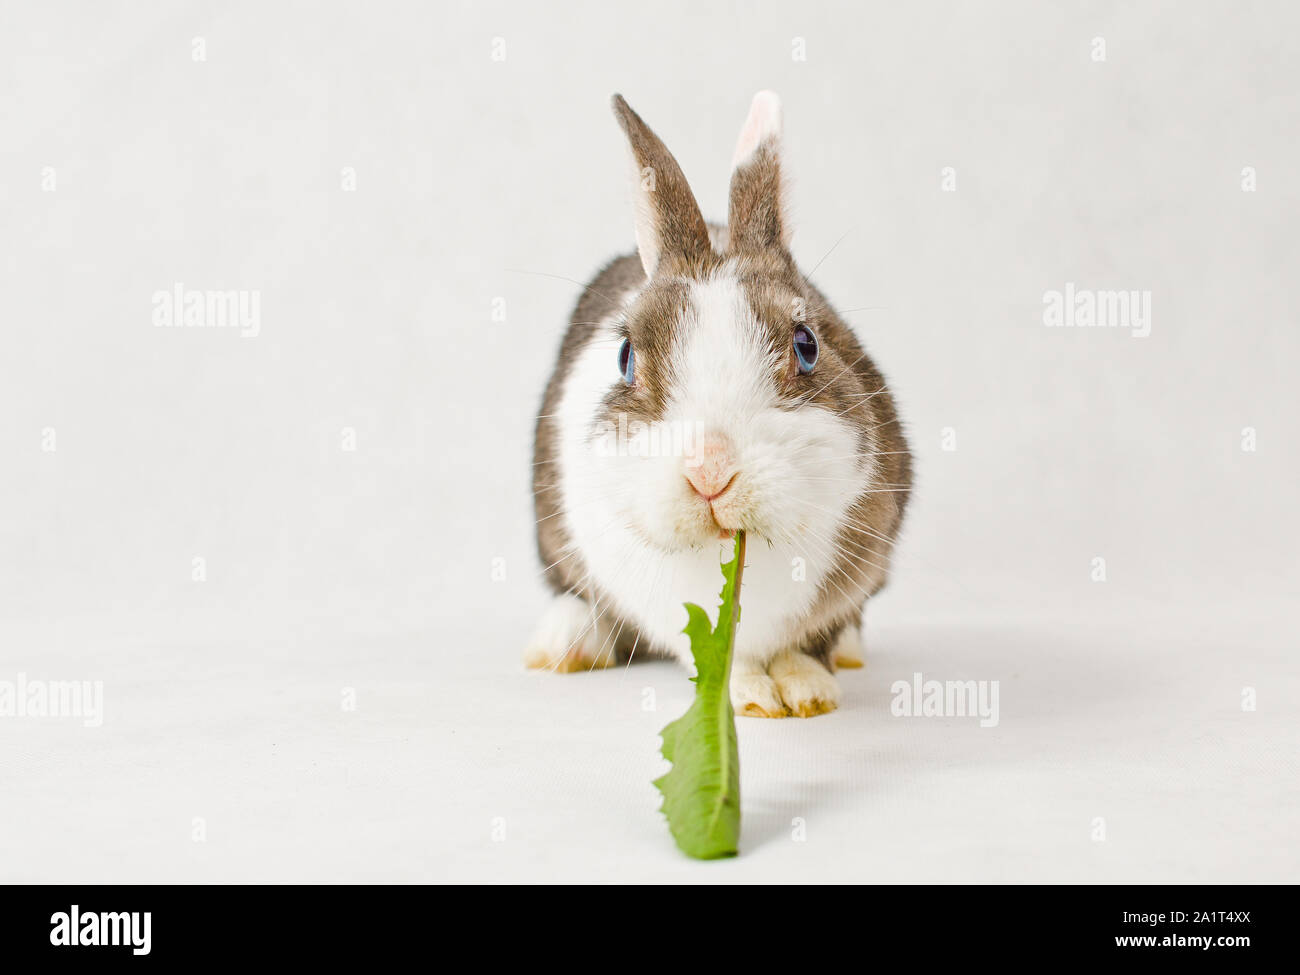 Grey and white dwarf rabbit with blue eyes eating green sappy dandelion leaf on white background Stock Photo